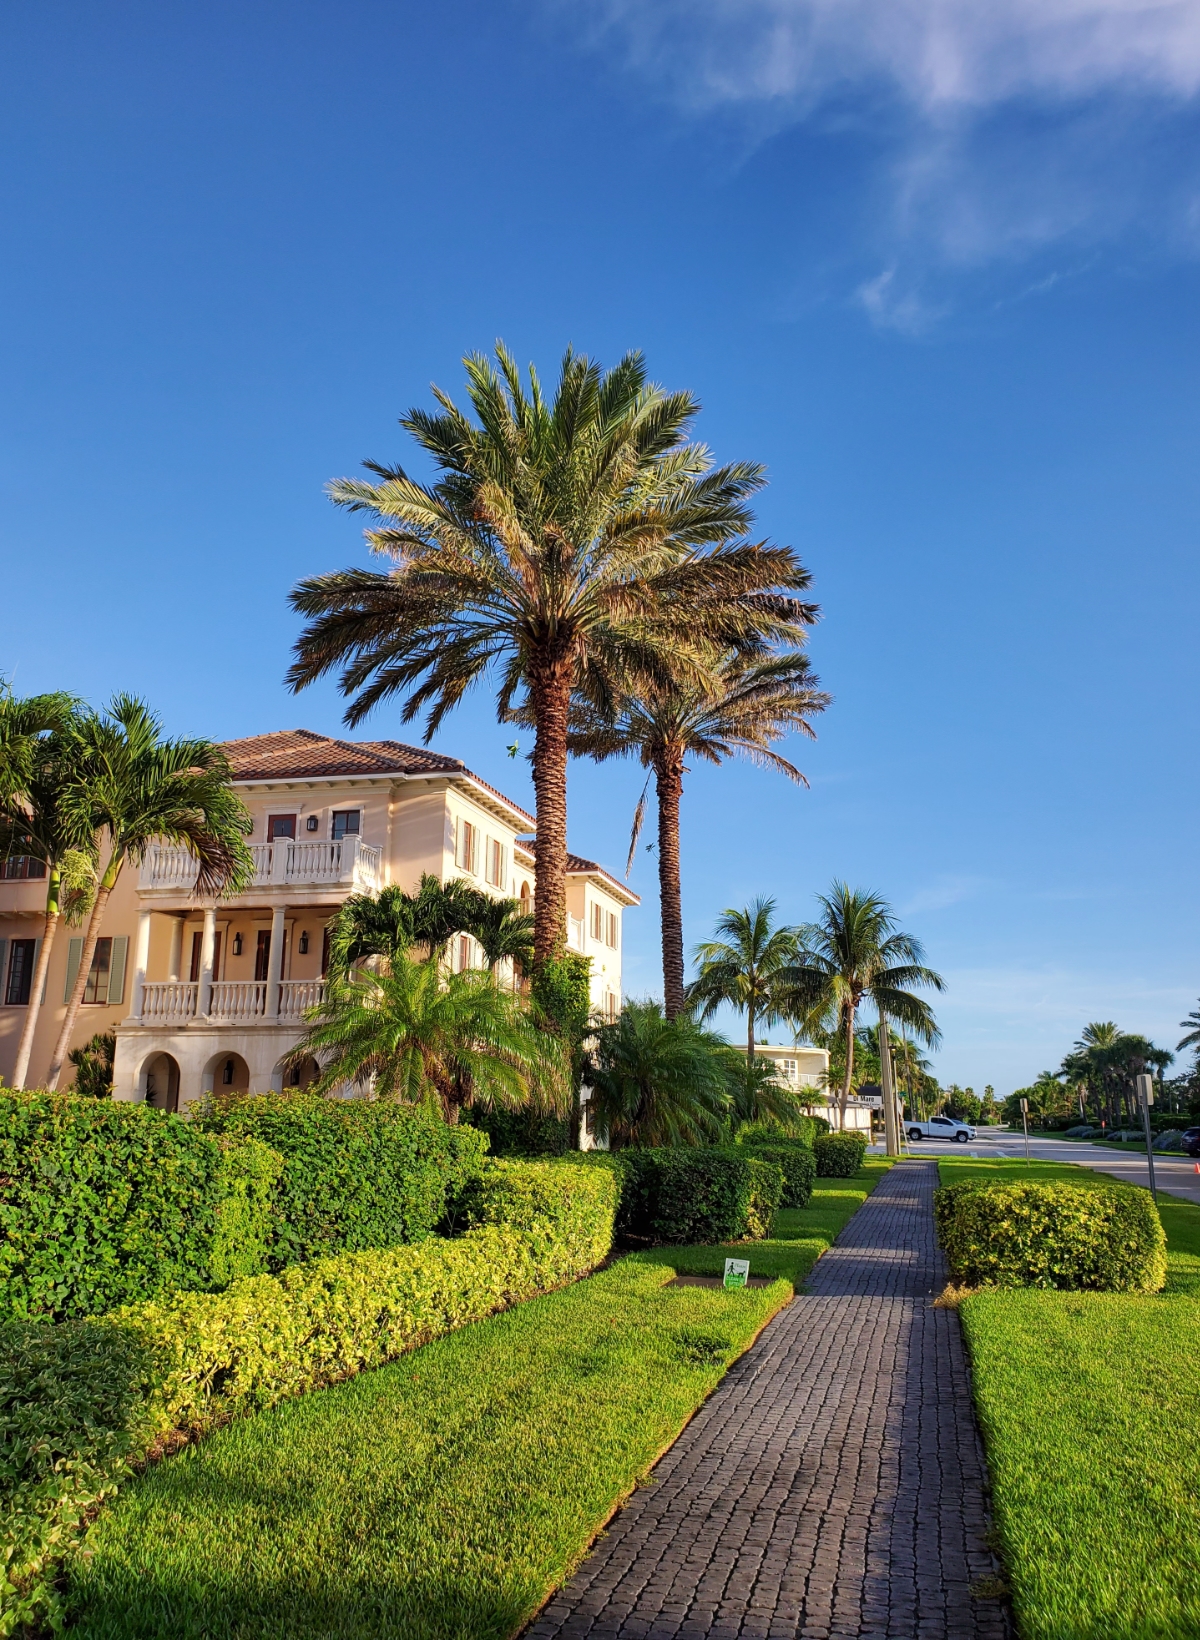 Lovely homes and landscaping in the neighborhood of South Beach Place Vero